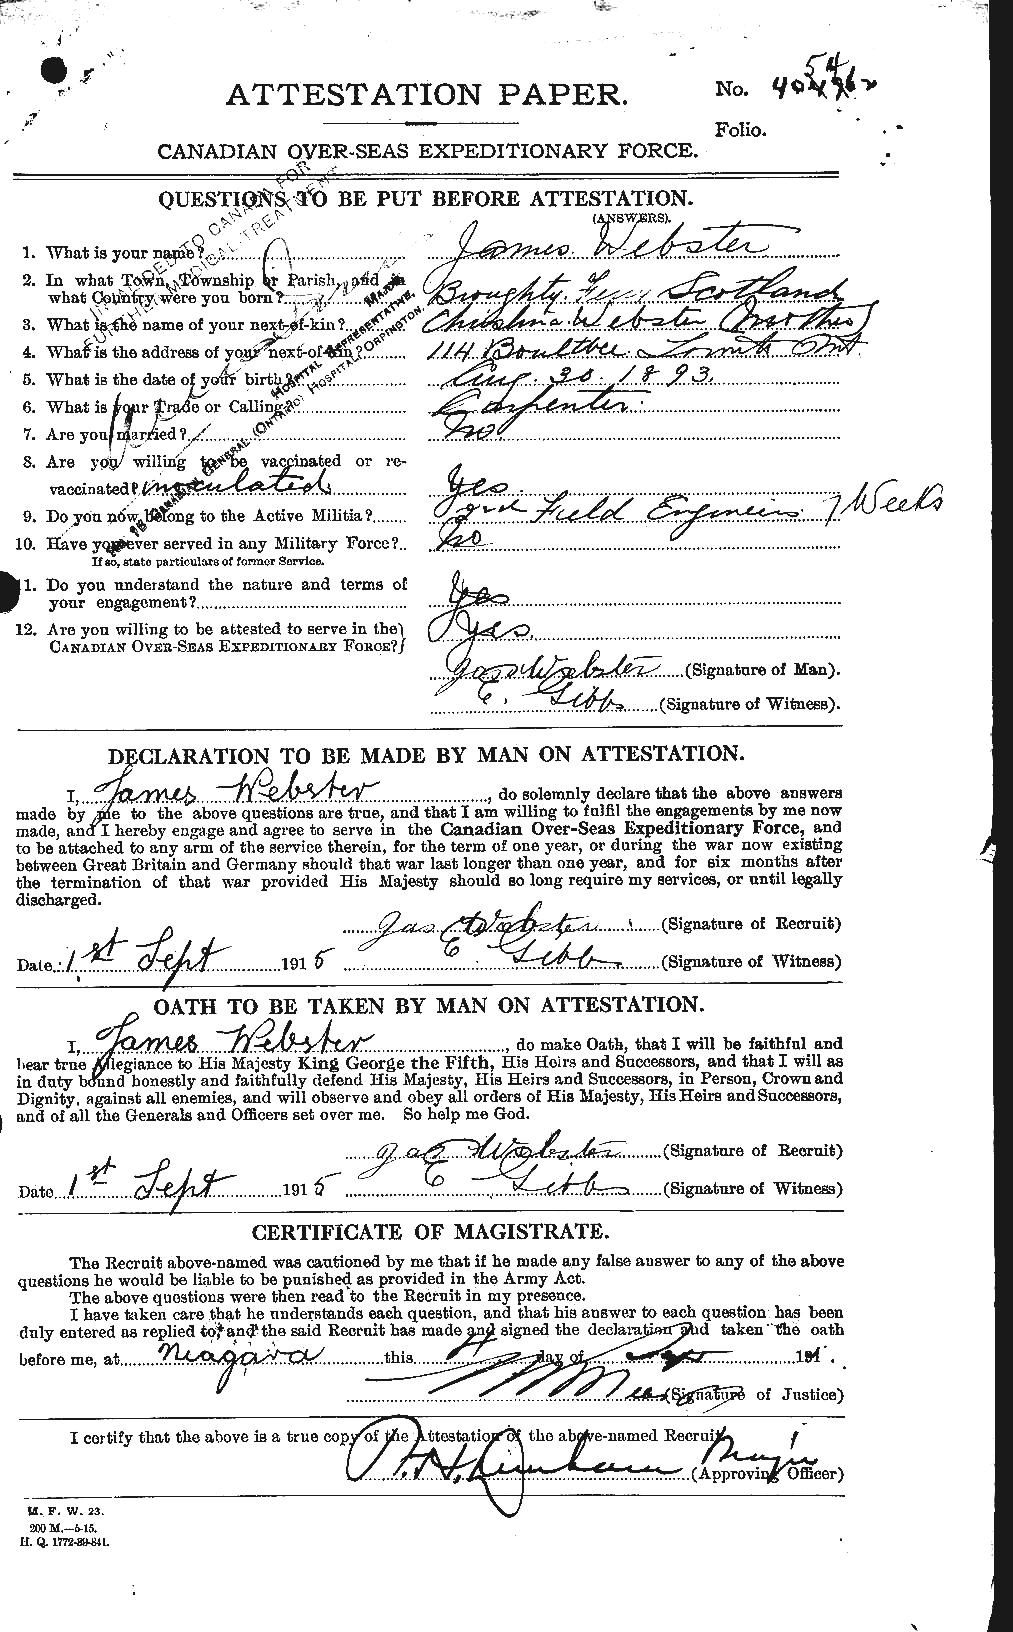 Personnel Records of the First World War - CEF 670449a